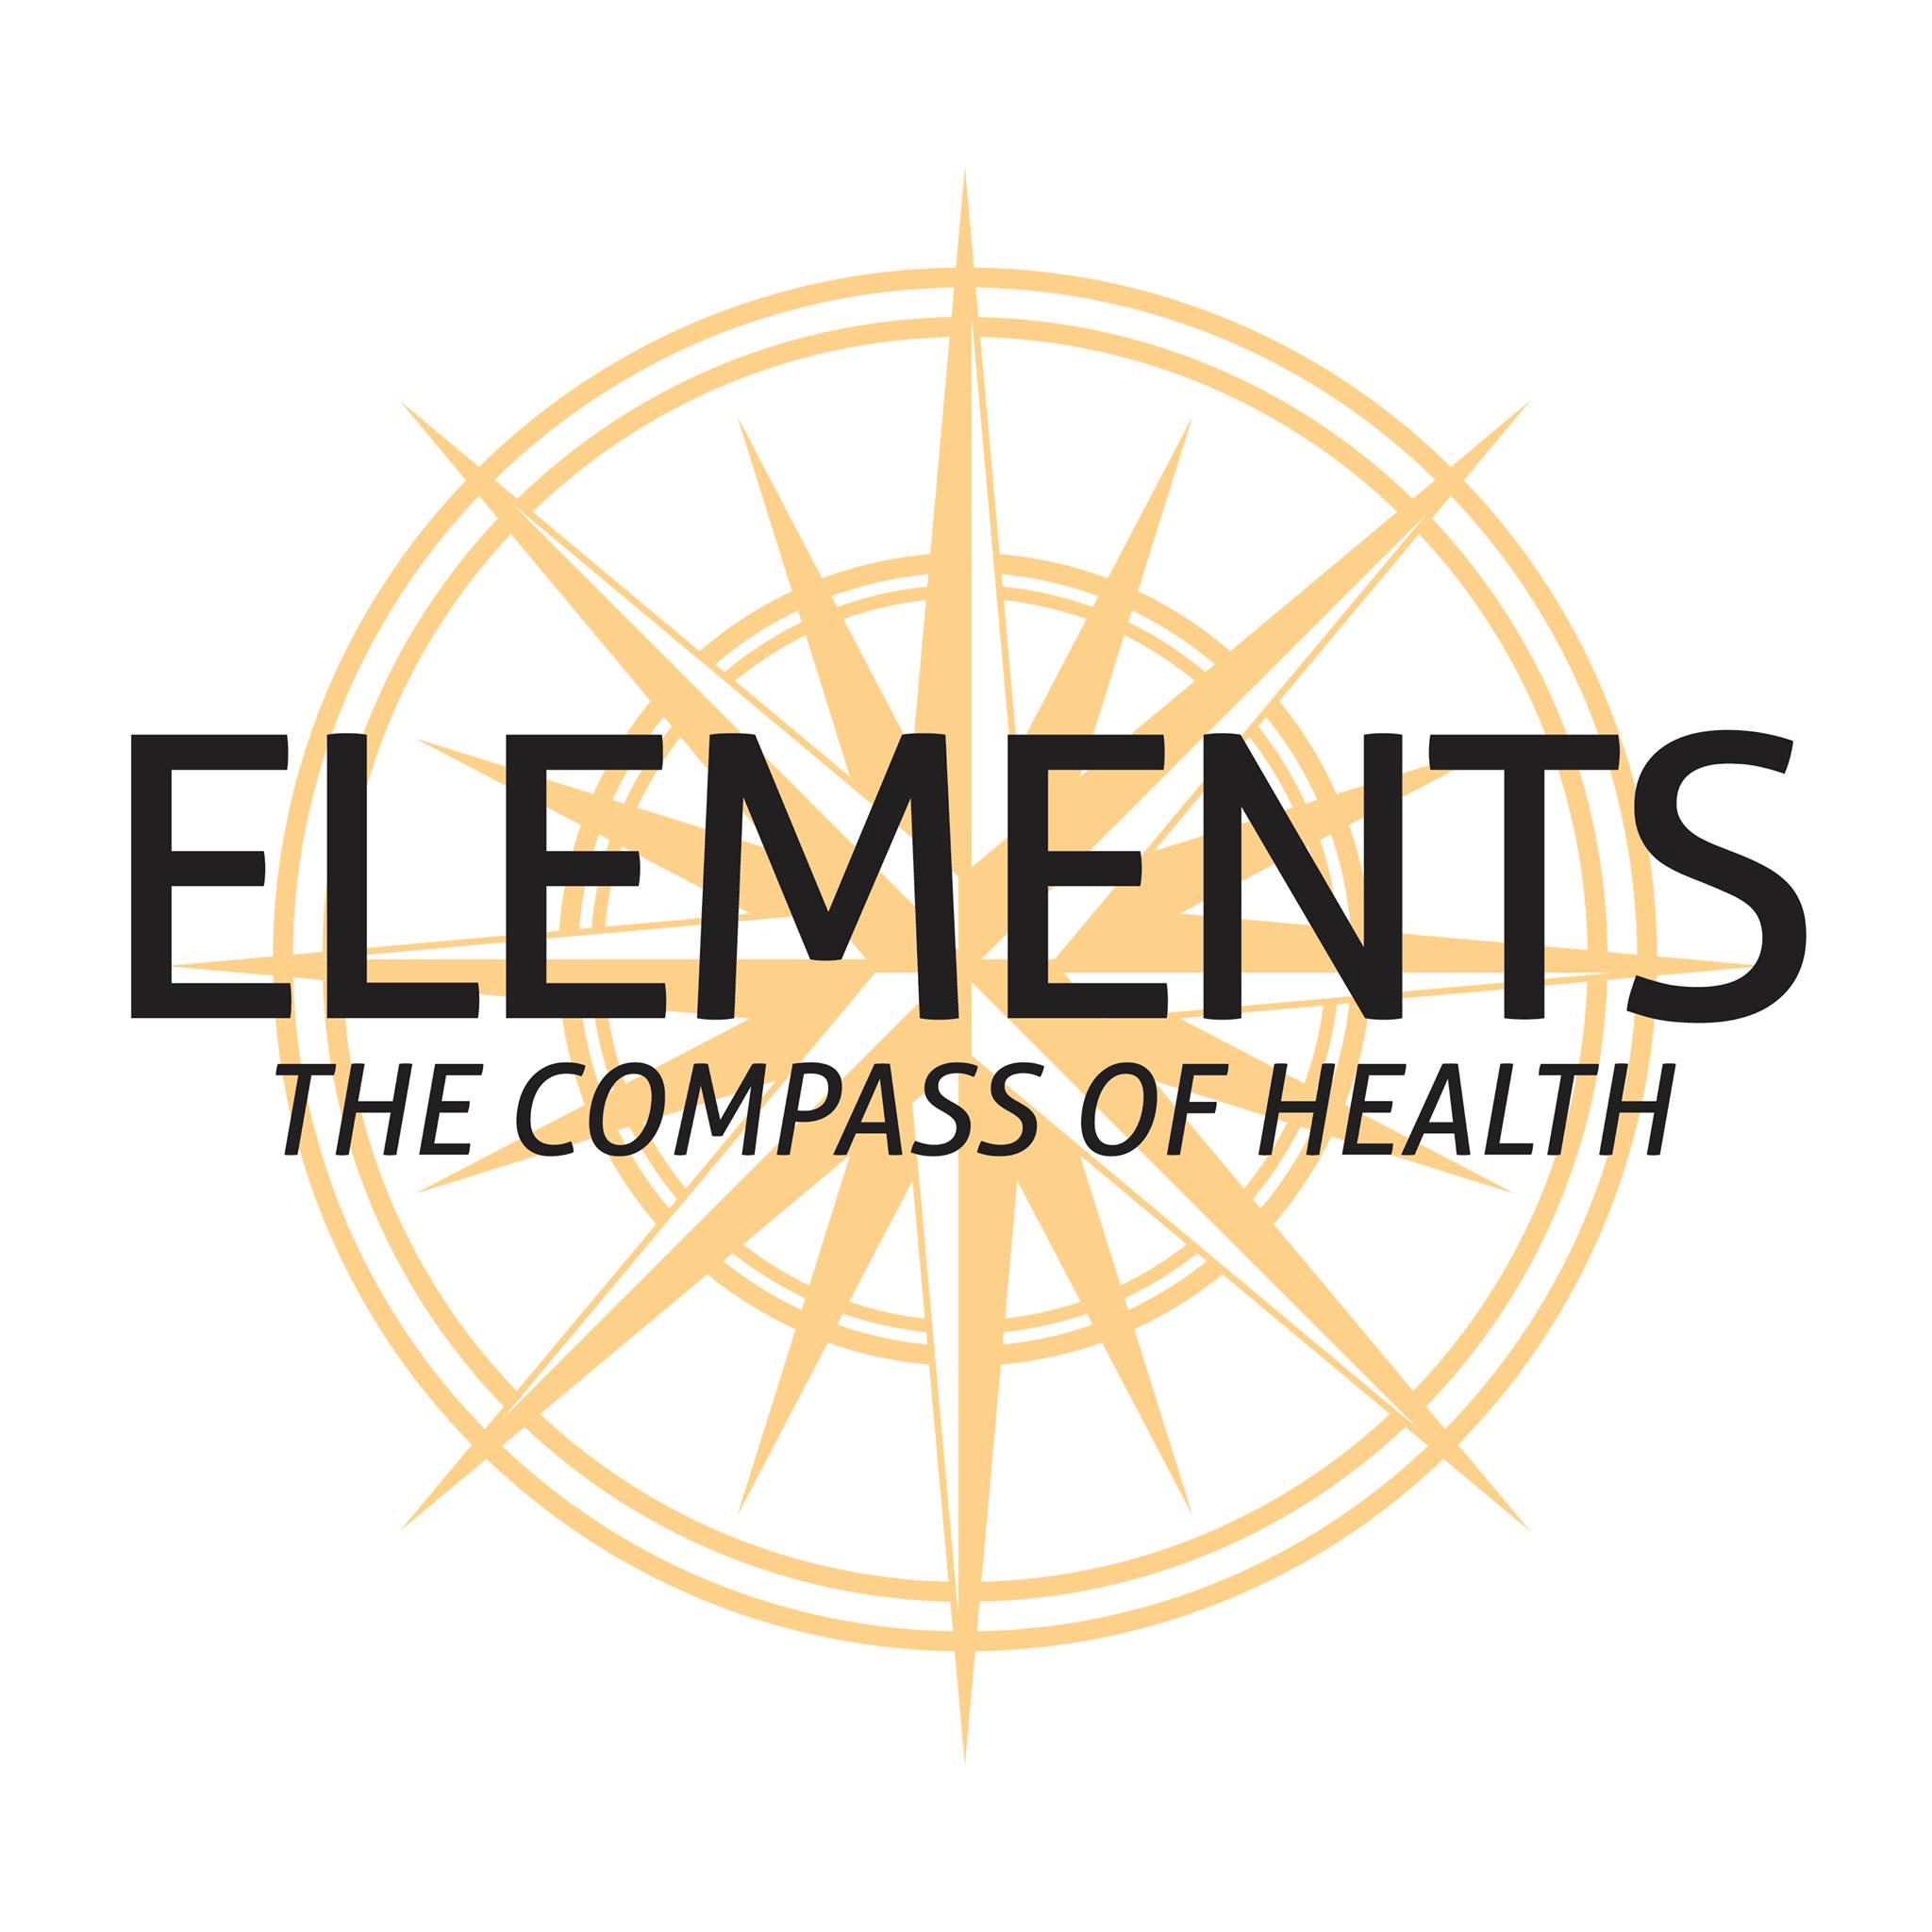 Elements - The Compass of Health